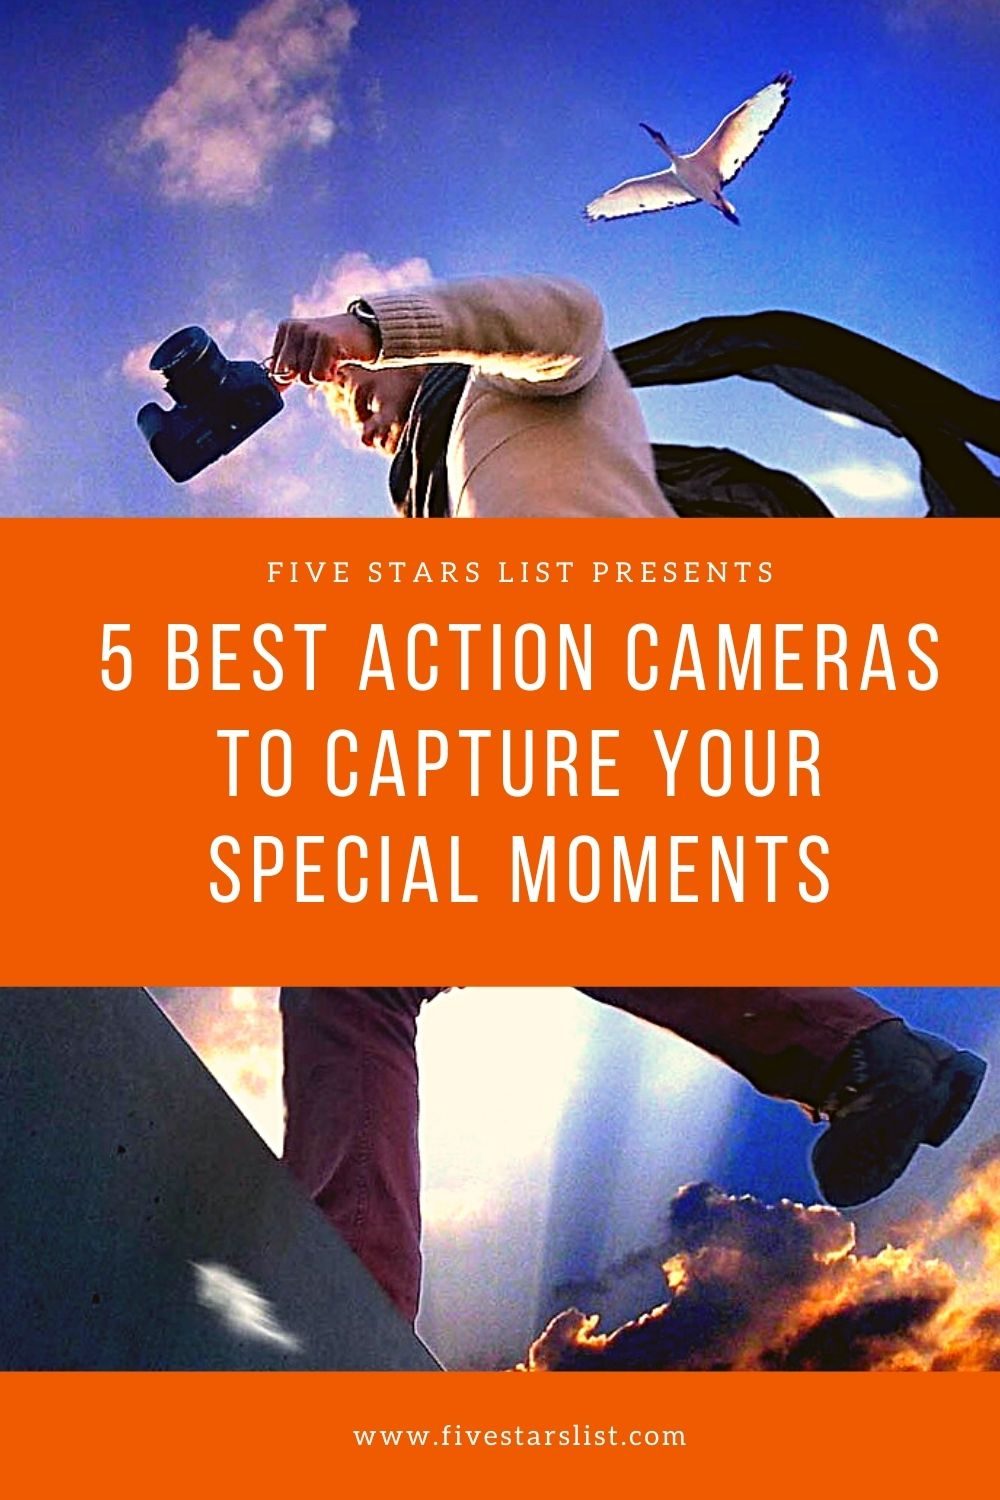 5 Best Action Cameras to Capture Your Special Moments